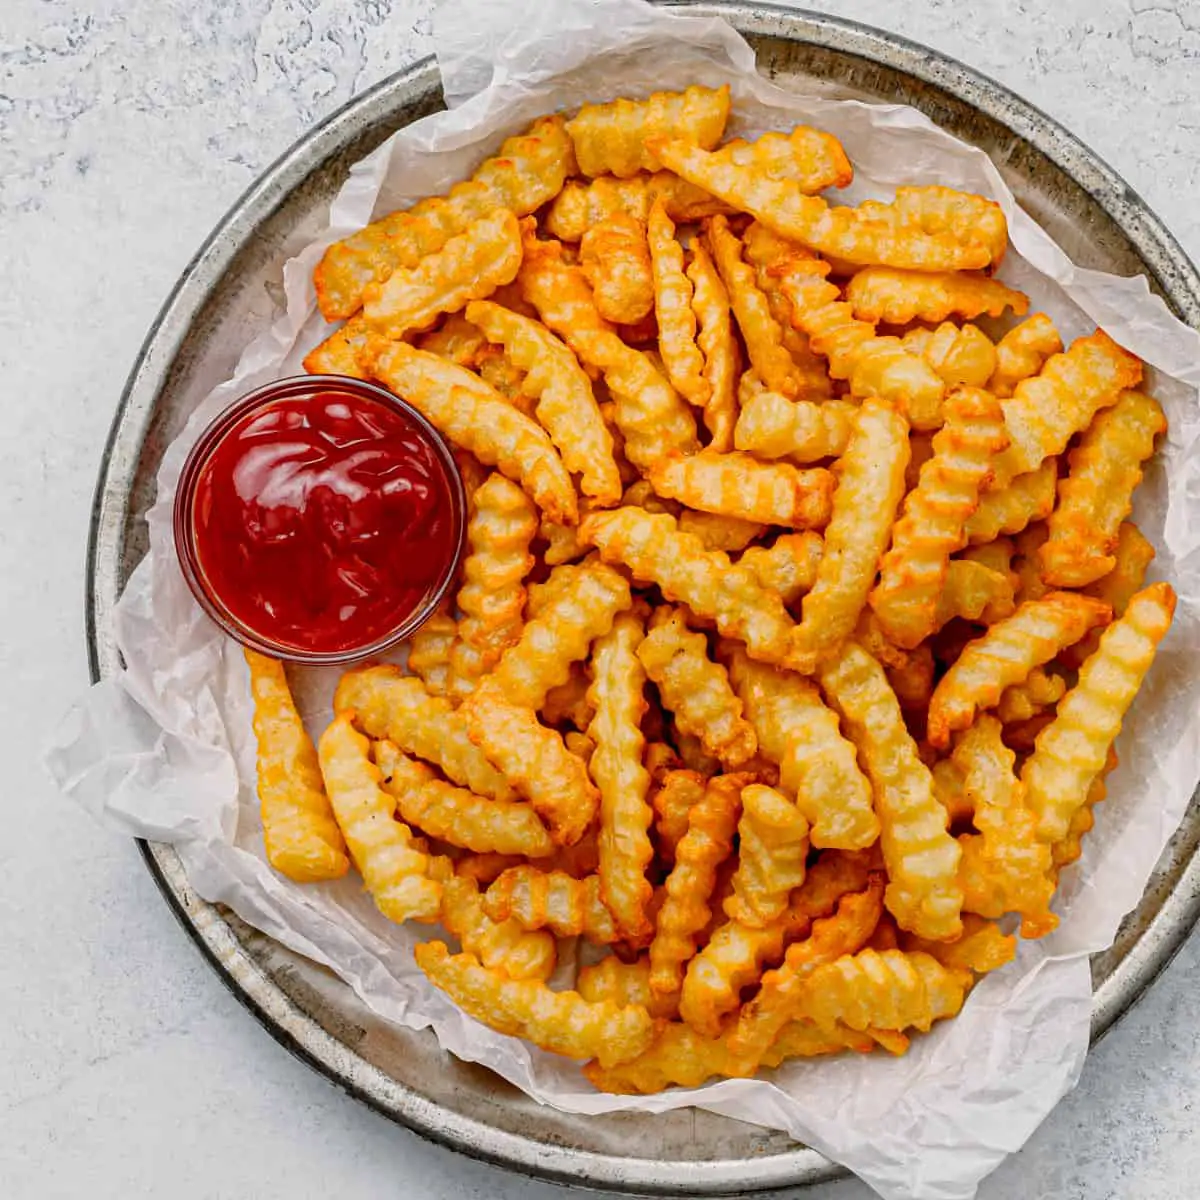 The Crispiest Air Fryer Frozen French Fries